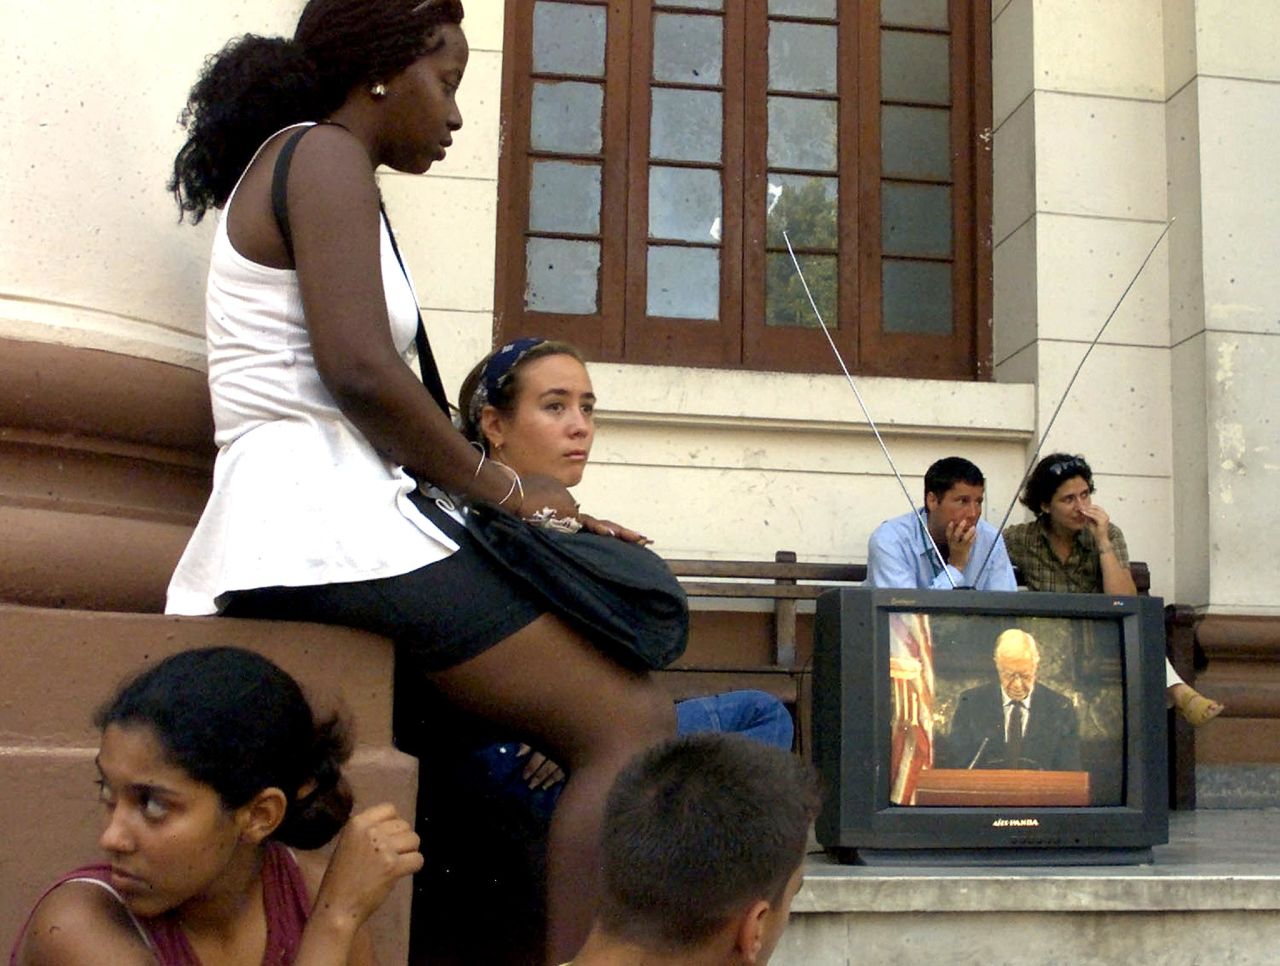 Students at the University of Havana listen to Carter outline his vision for improved relations between the United States and Cuba on May 14, 2002. The speech was broadcast live and uncensored on Cuban state television.